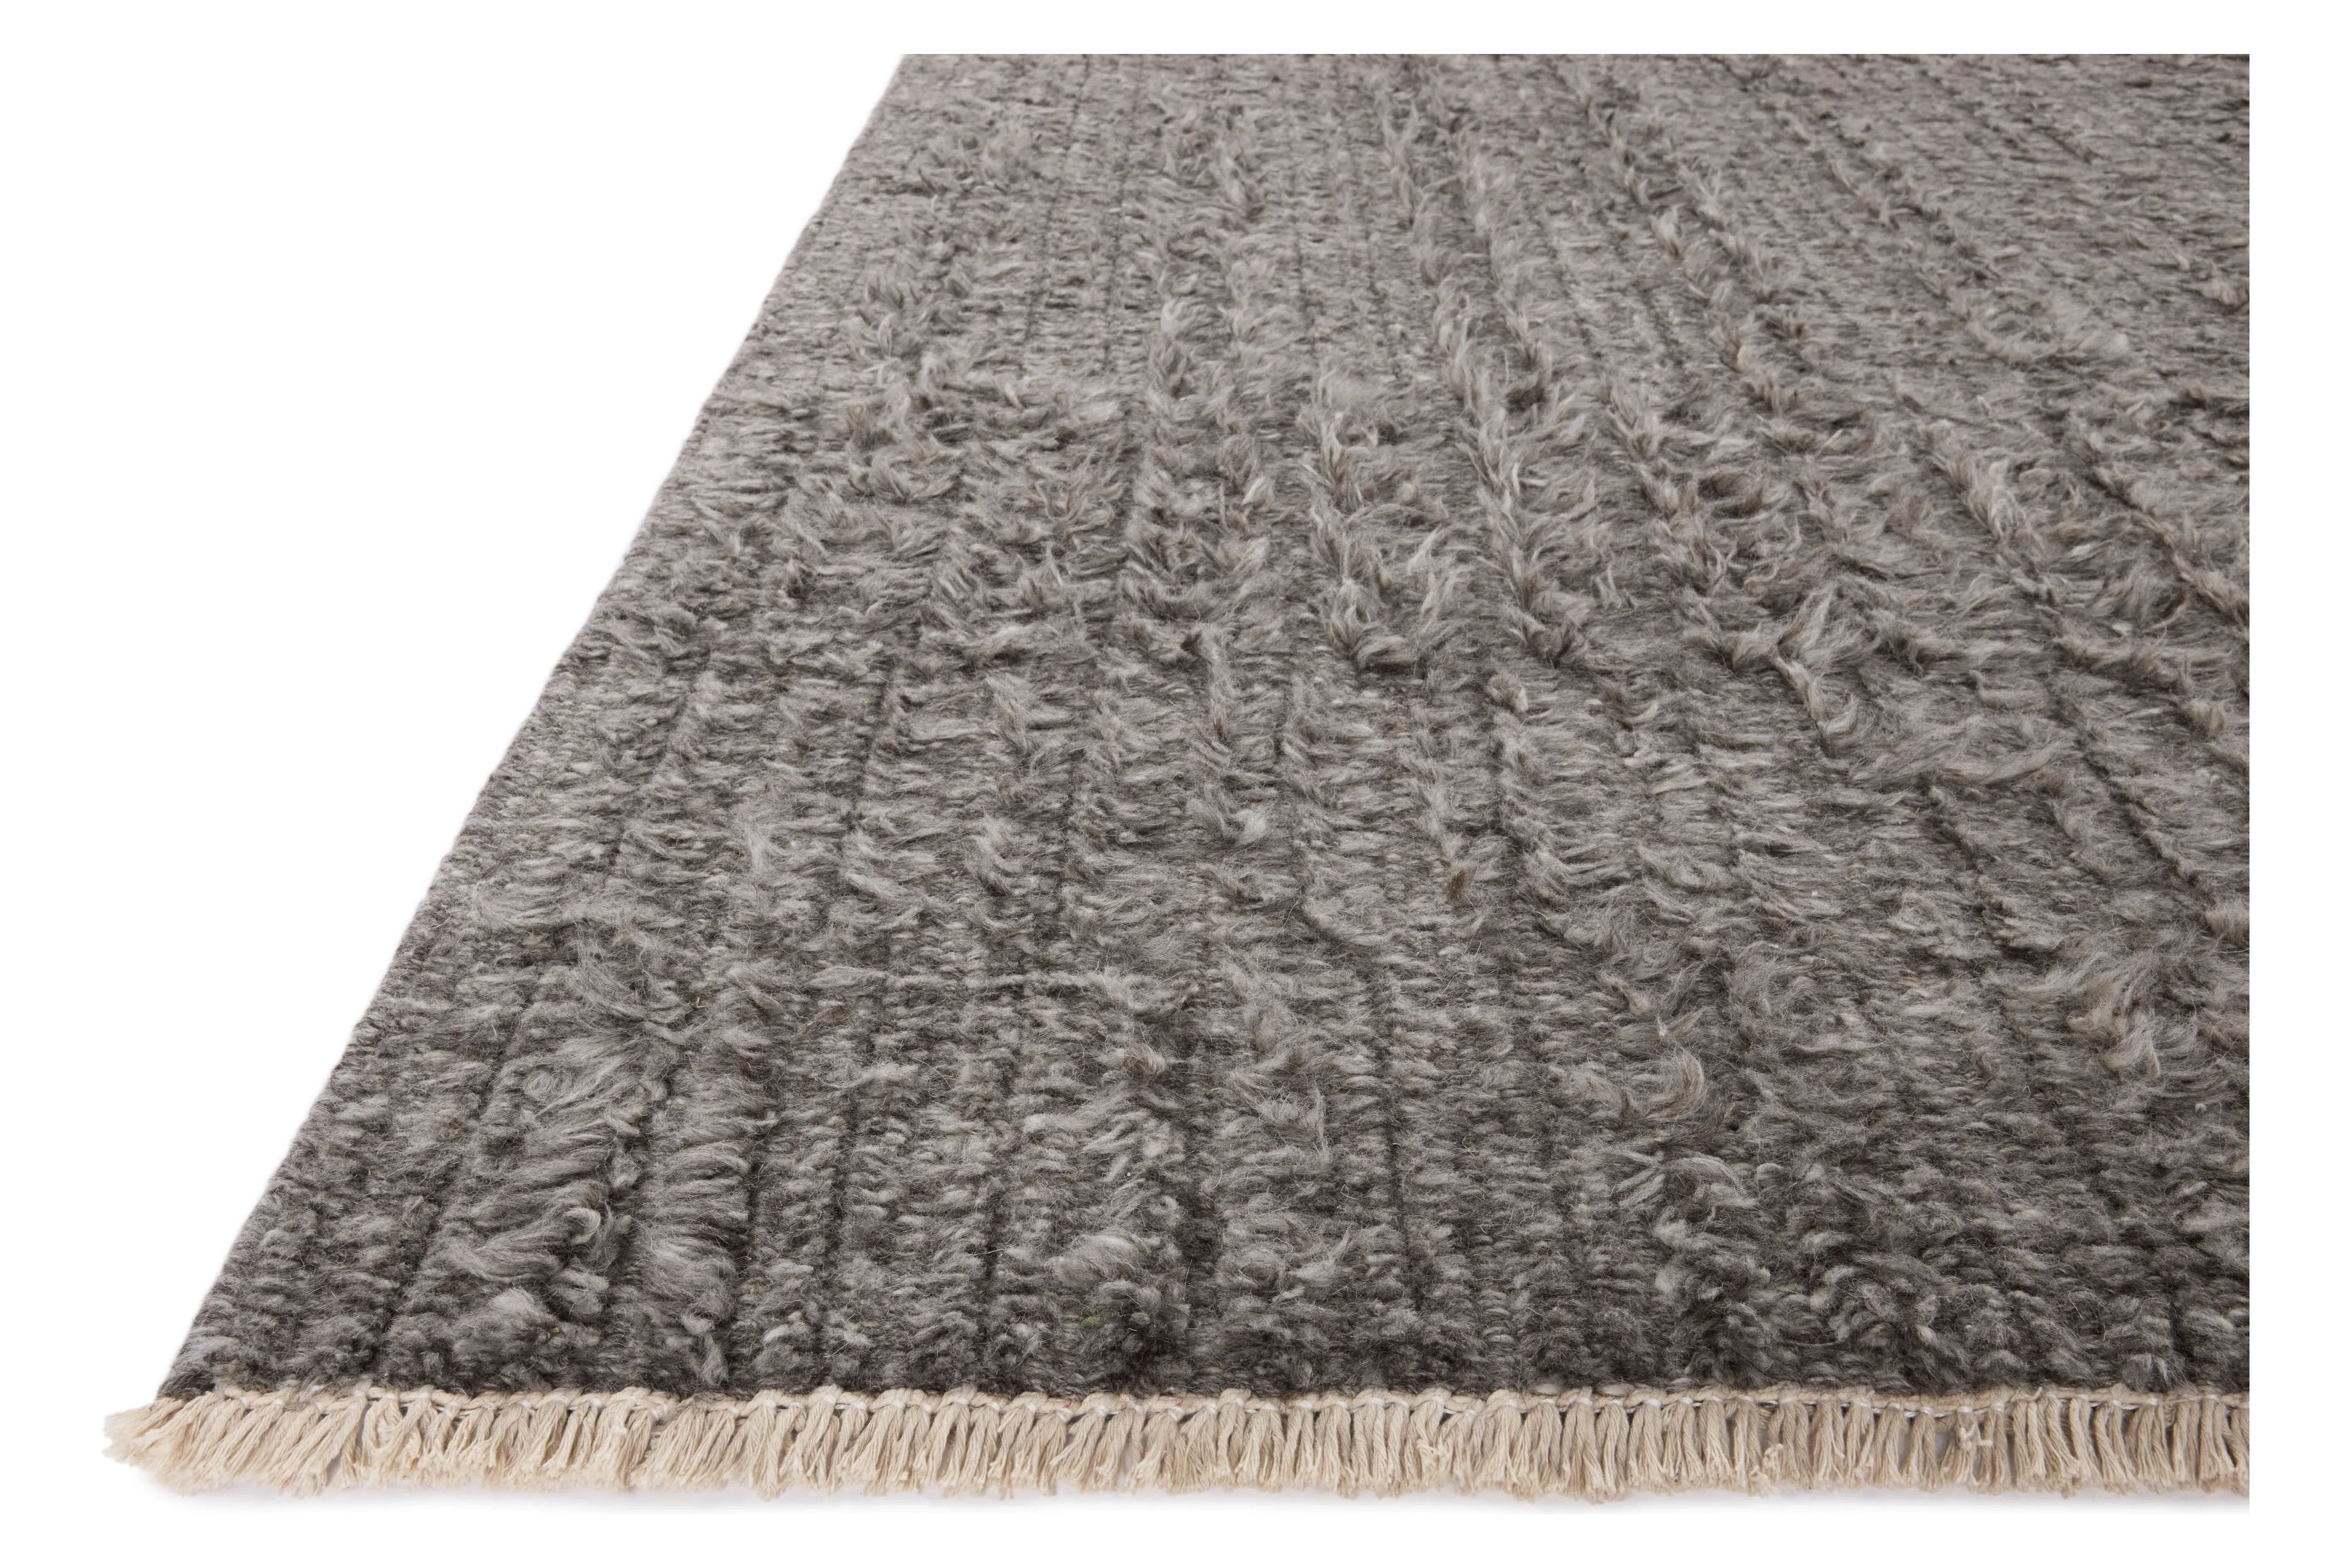 Irresistible to walk upon, the Dana Granite Rug by Brigette Romanek x Loloi has a high-low texture that alternates between a subtly shaggy pile and a soft base. Horizontal broken stripes give the area rug a fresh and energized structure, while a finish of fringe along the edges accentuates its sense of movement. Amethyst Home provides interior design, new home construction design consulting, vintage area rugs, and lighting in the Charlotte metro area.